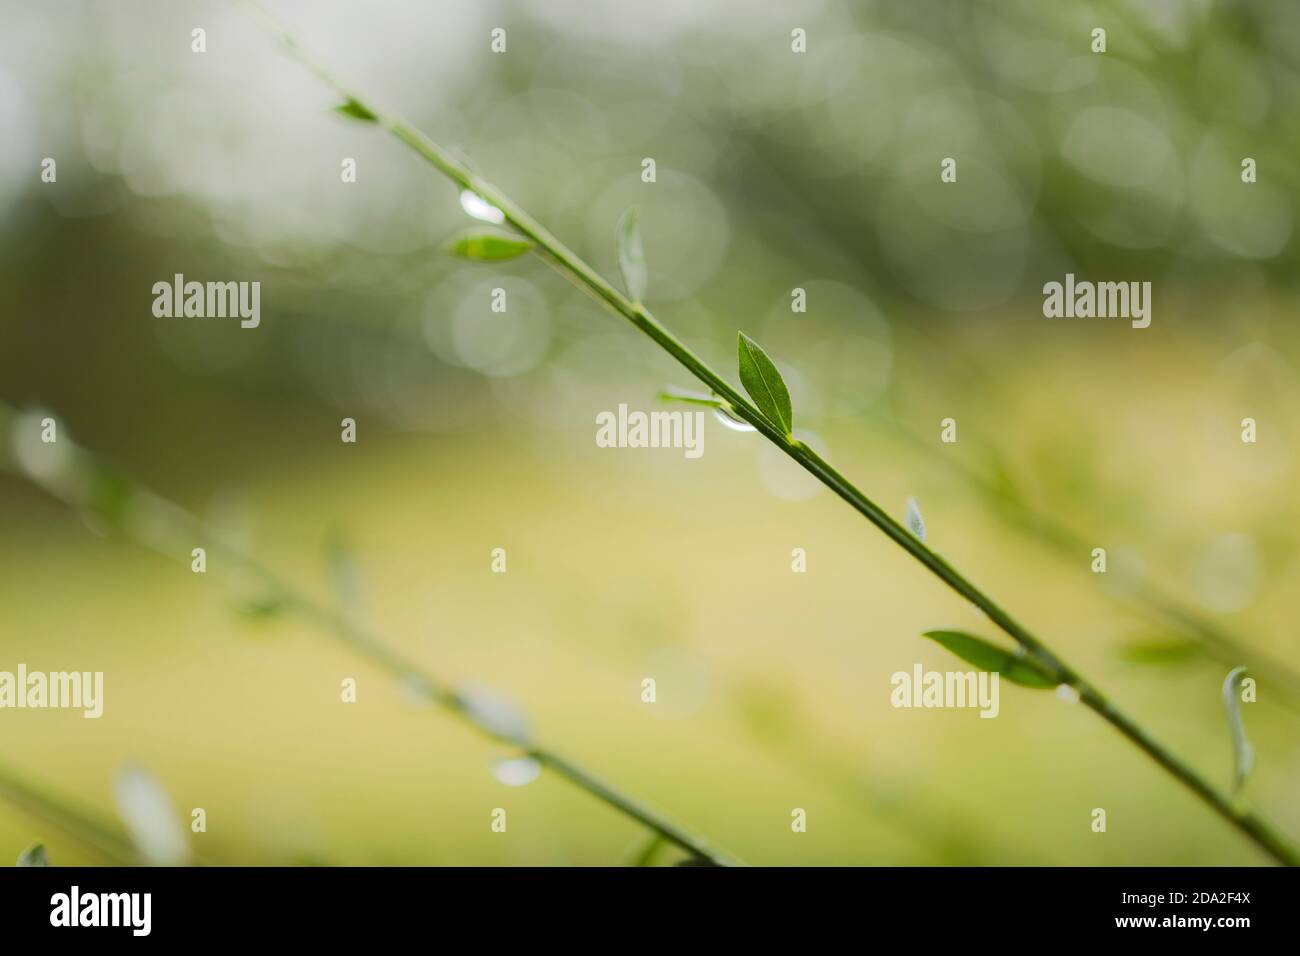 drops of water on grass leaves, nature background Stock Photo